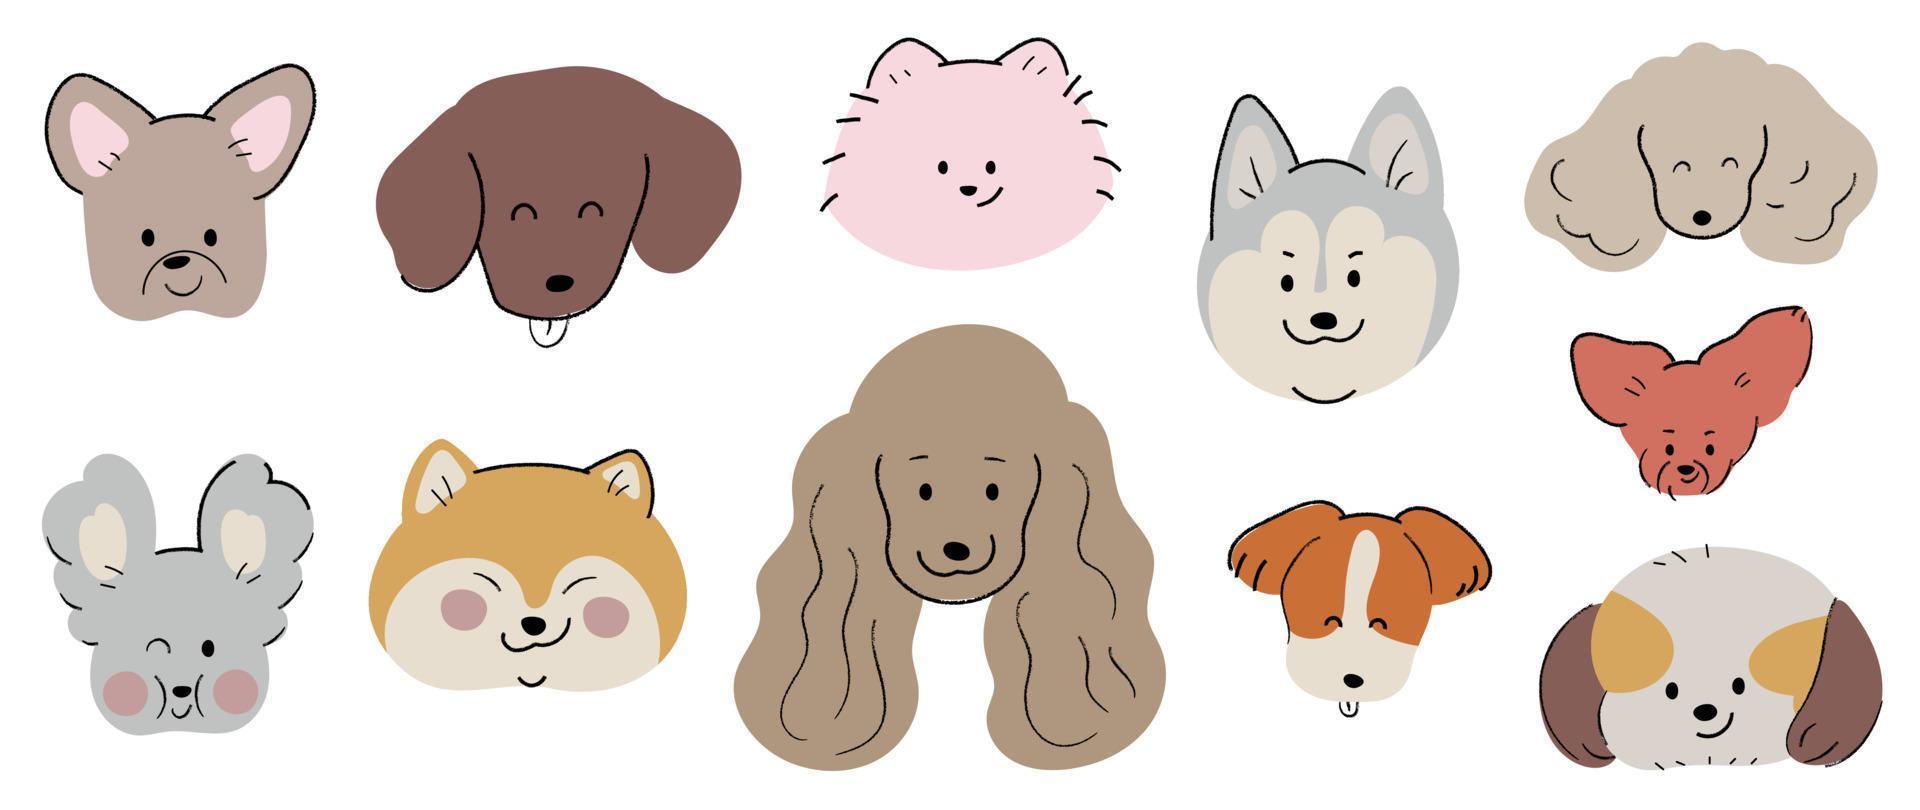 Cute and smile dog heads doodle vector set. Comic happy dog faces character design of husky, poodle, shiba with flat color isolated on white background. Design illustration for sticker, comic, print.